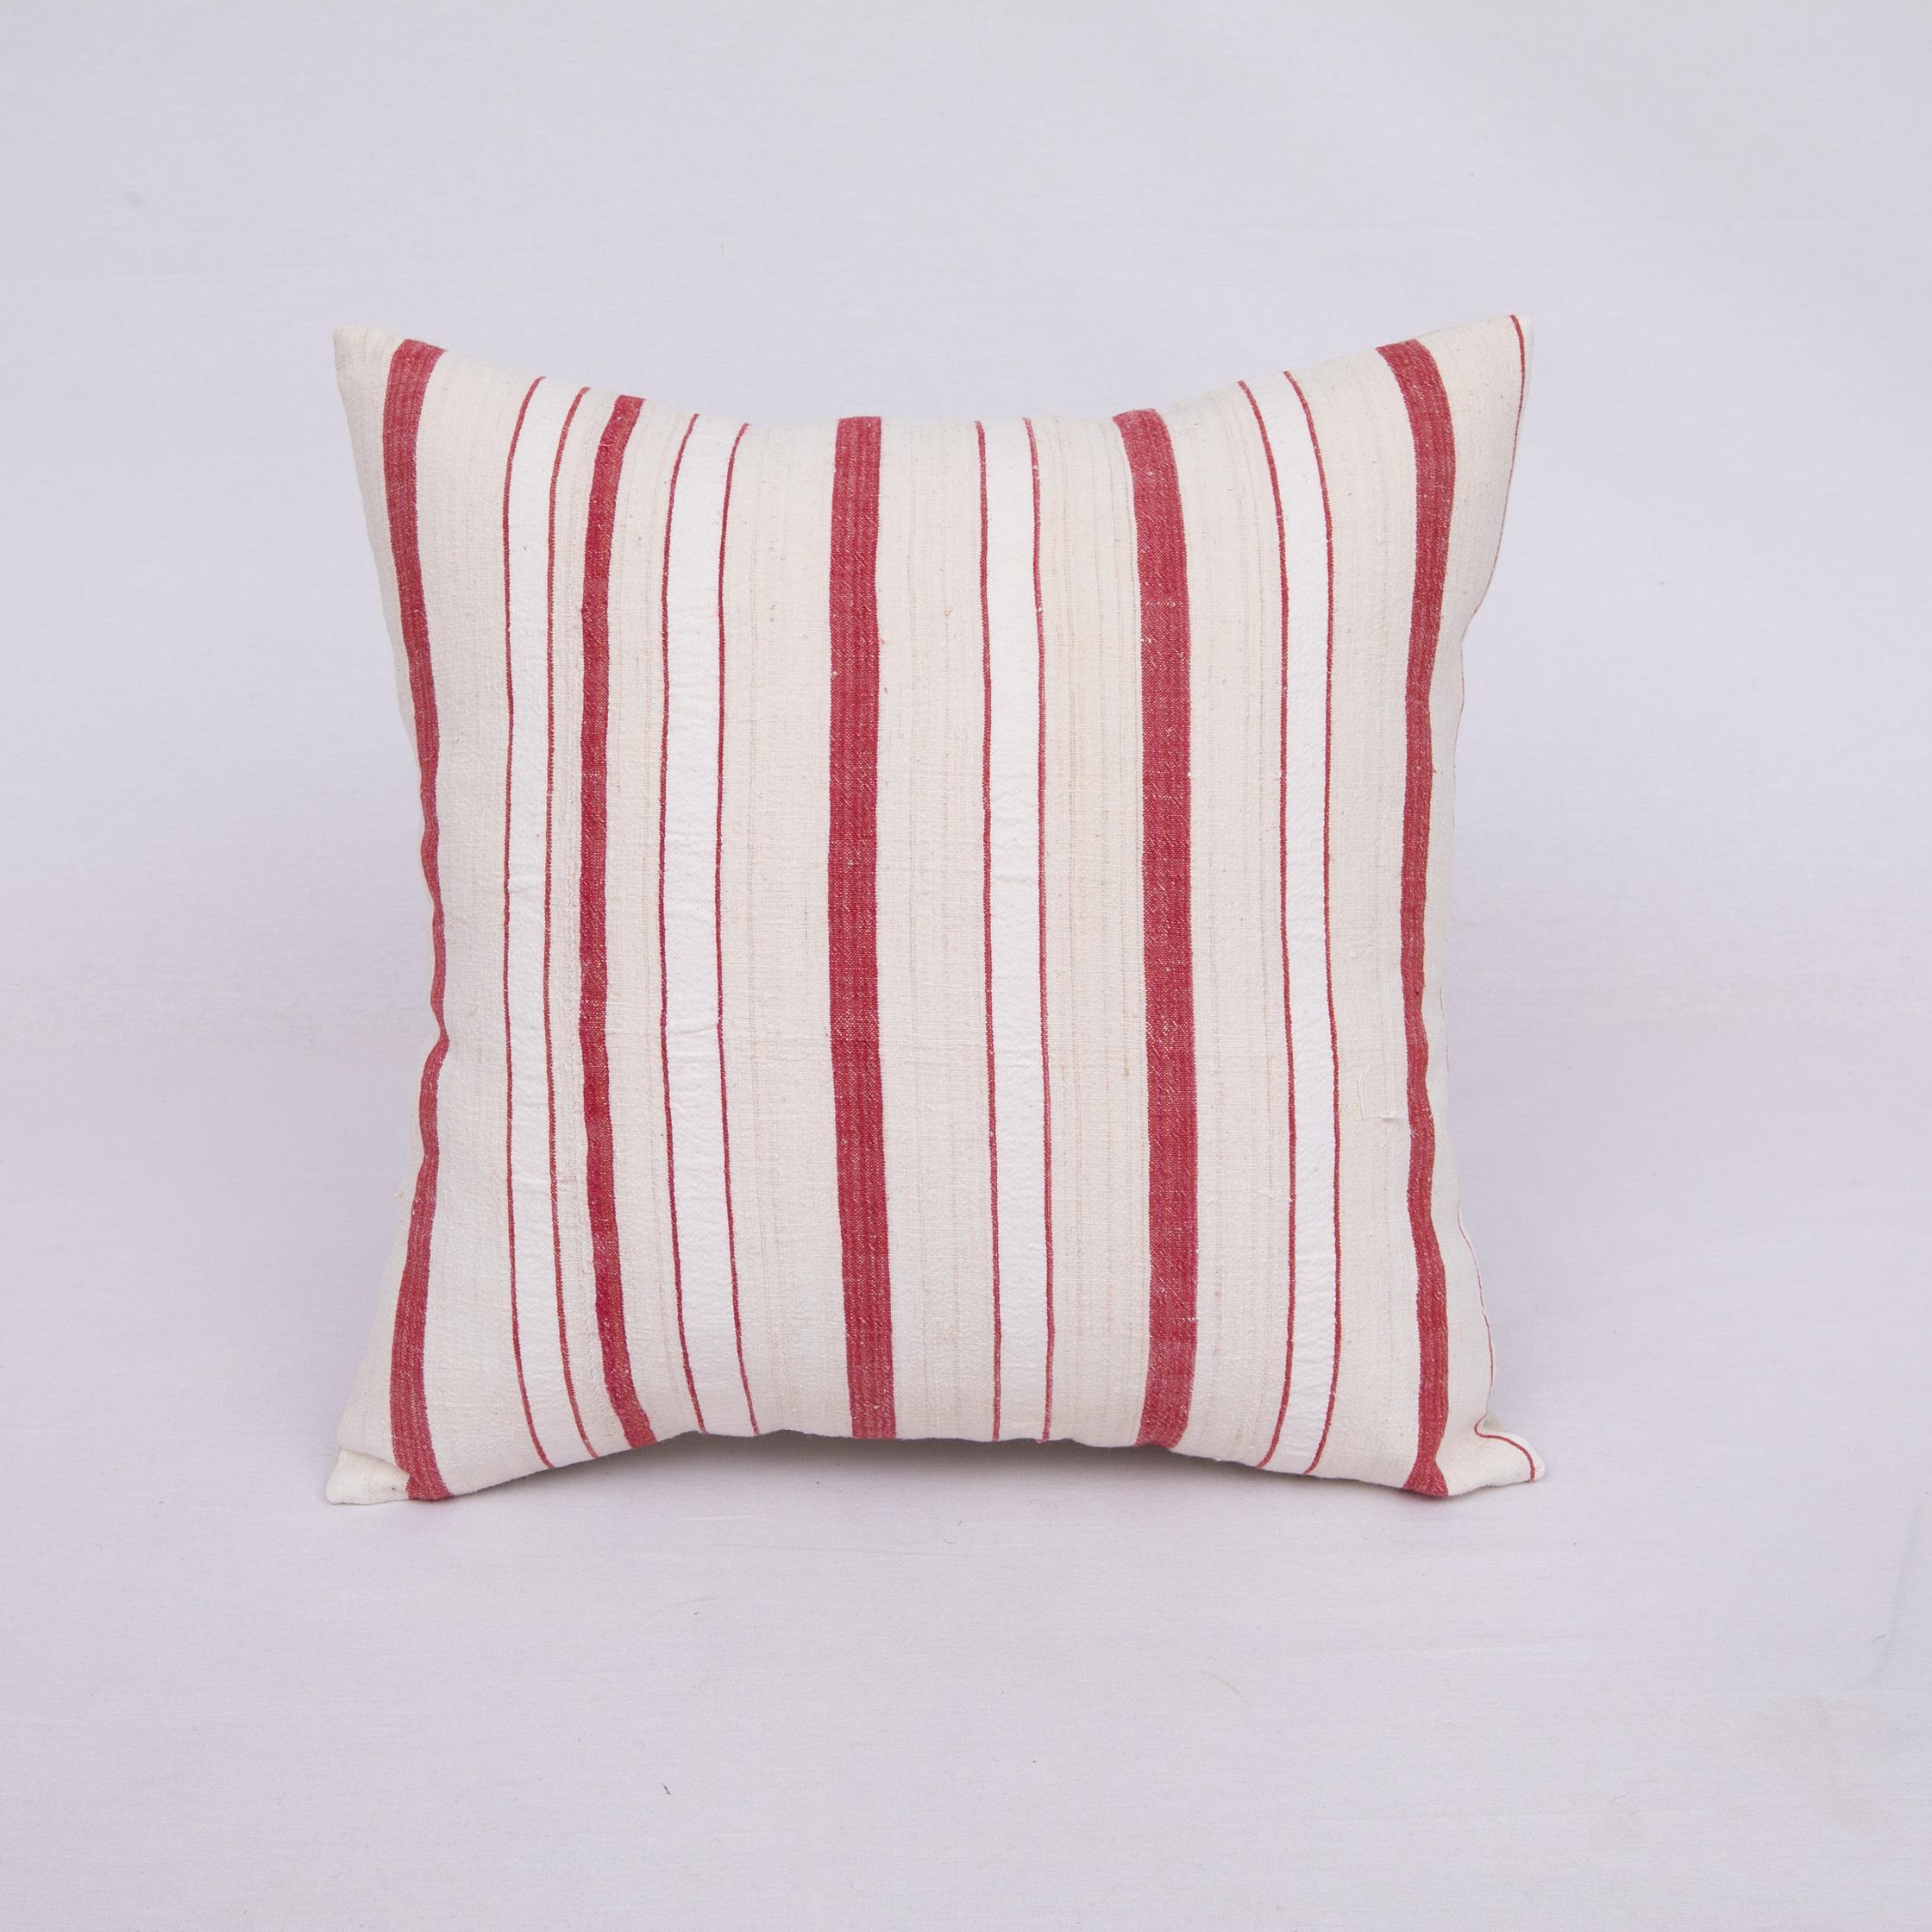 Pillow Cover is made from a hand woven cotton fabric, woven in Anatolia, Turkey.
It does not come with an insert.
Cotton in the back.
Zipper closure.
Dry clean is recommended.
   